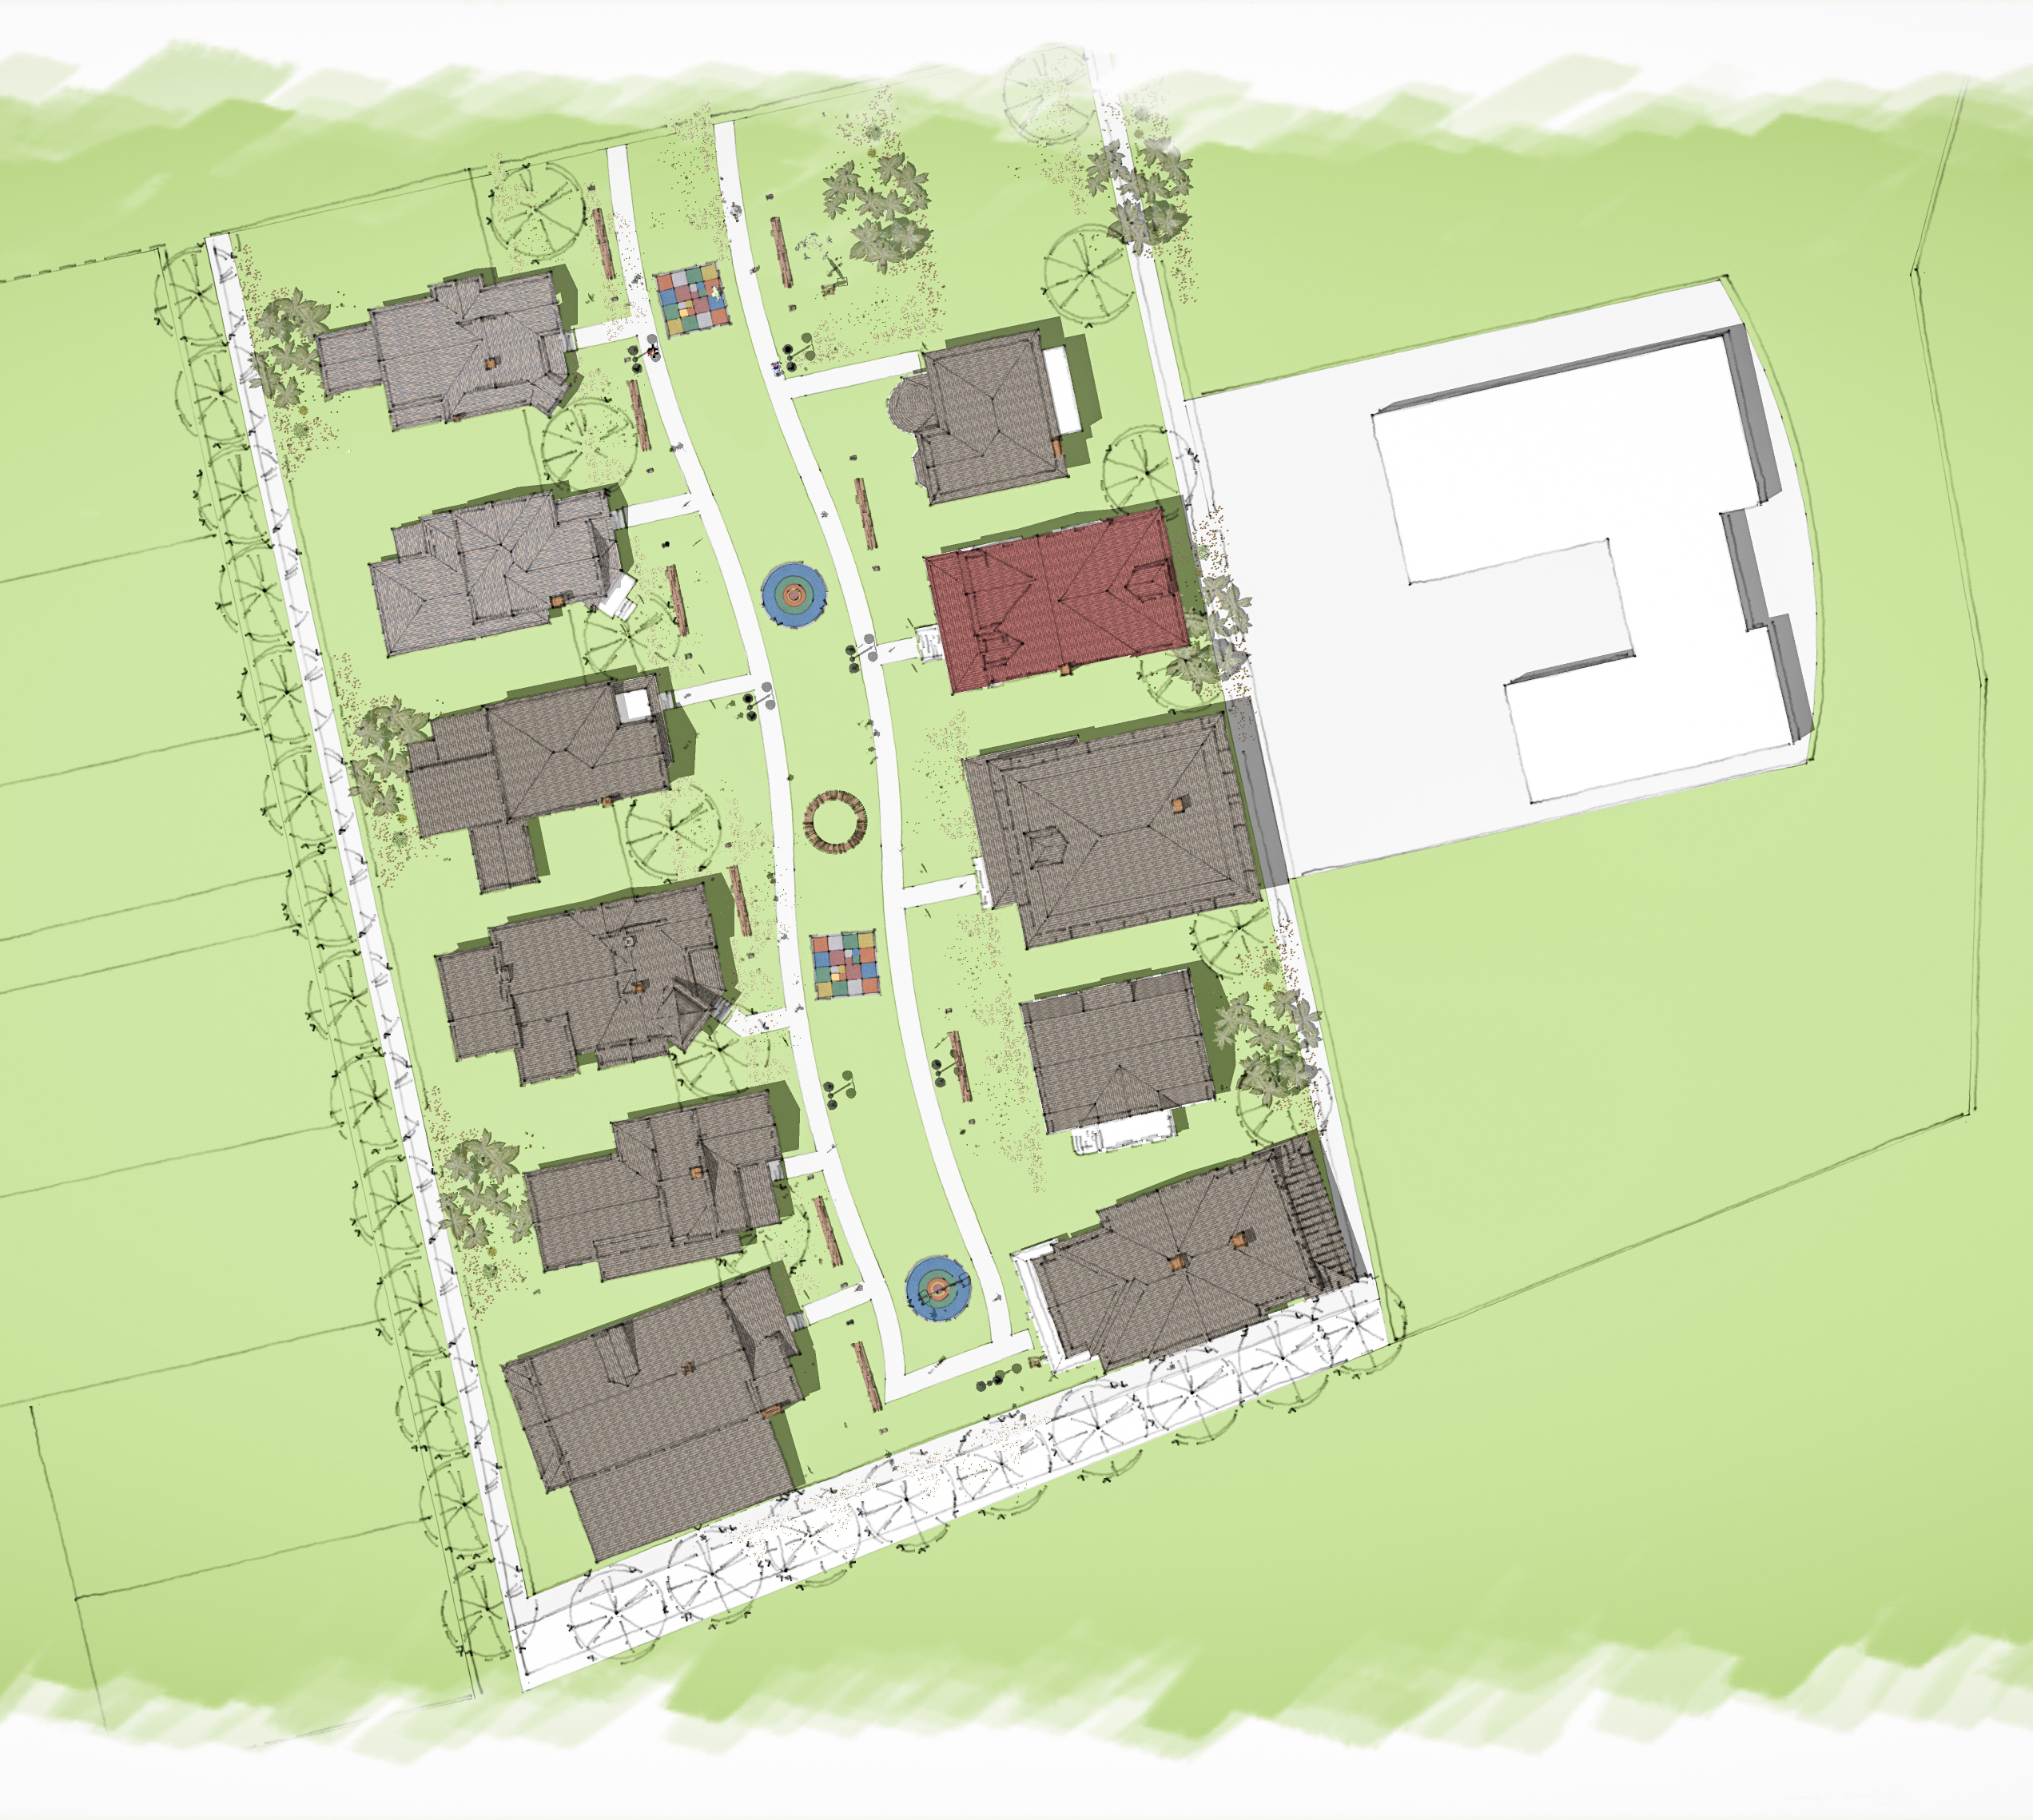 Aerial view showing one possible configuration for the homes.